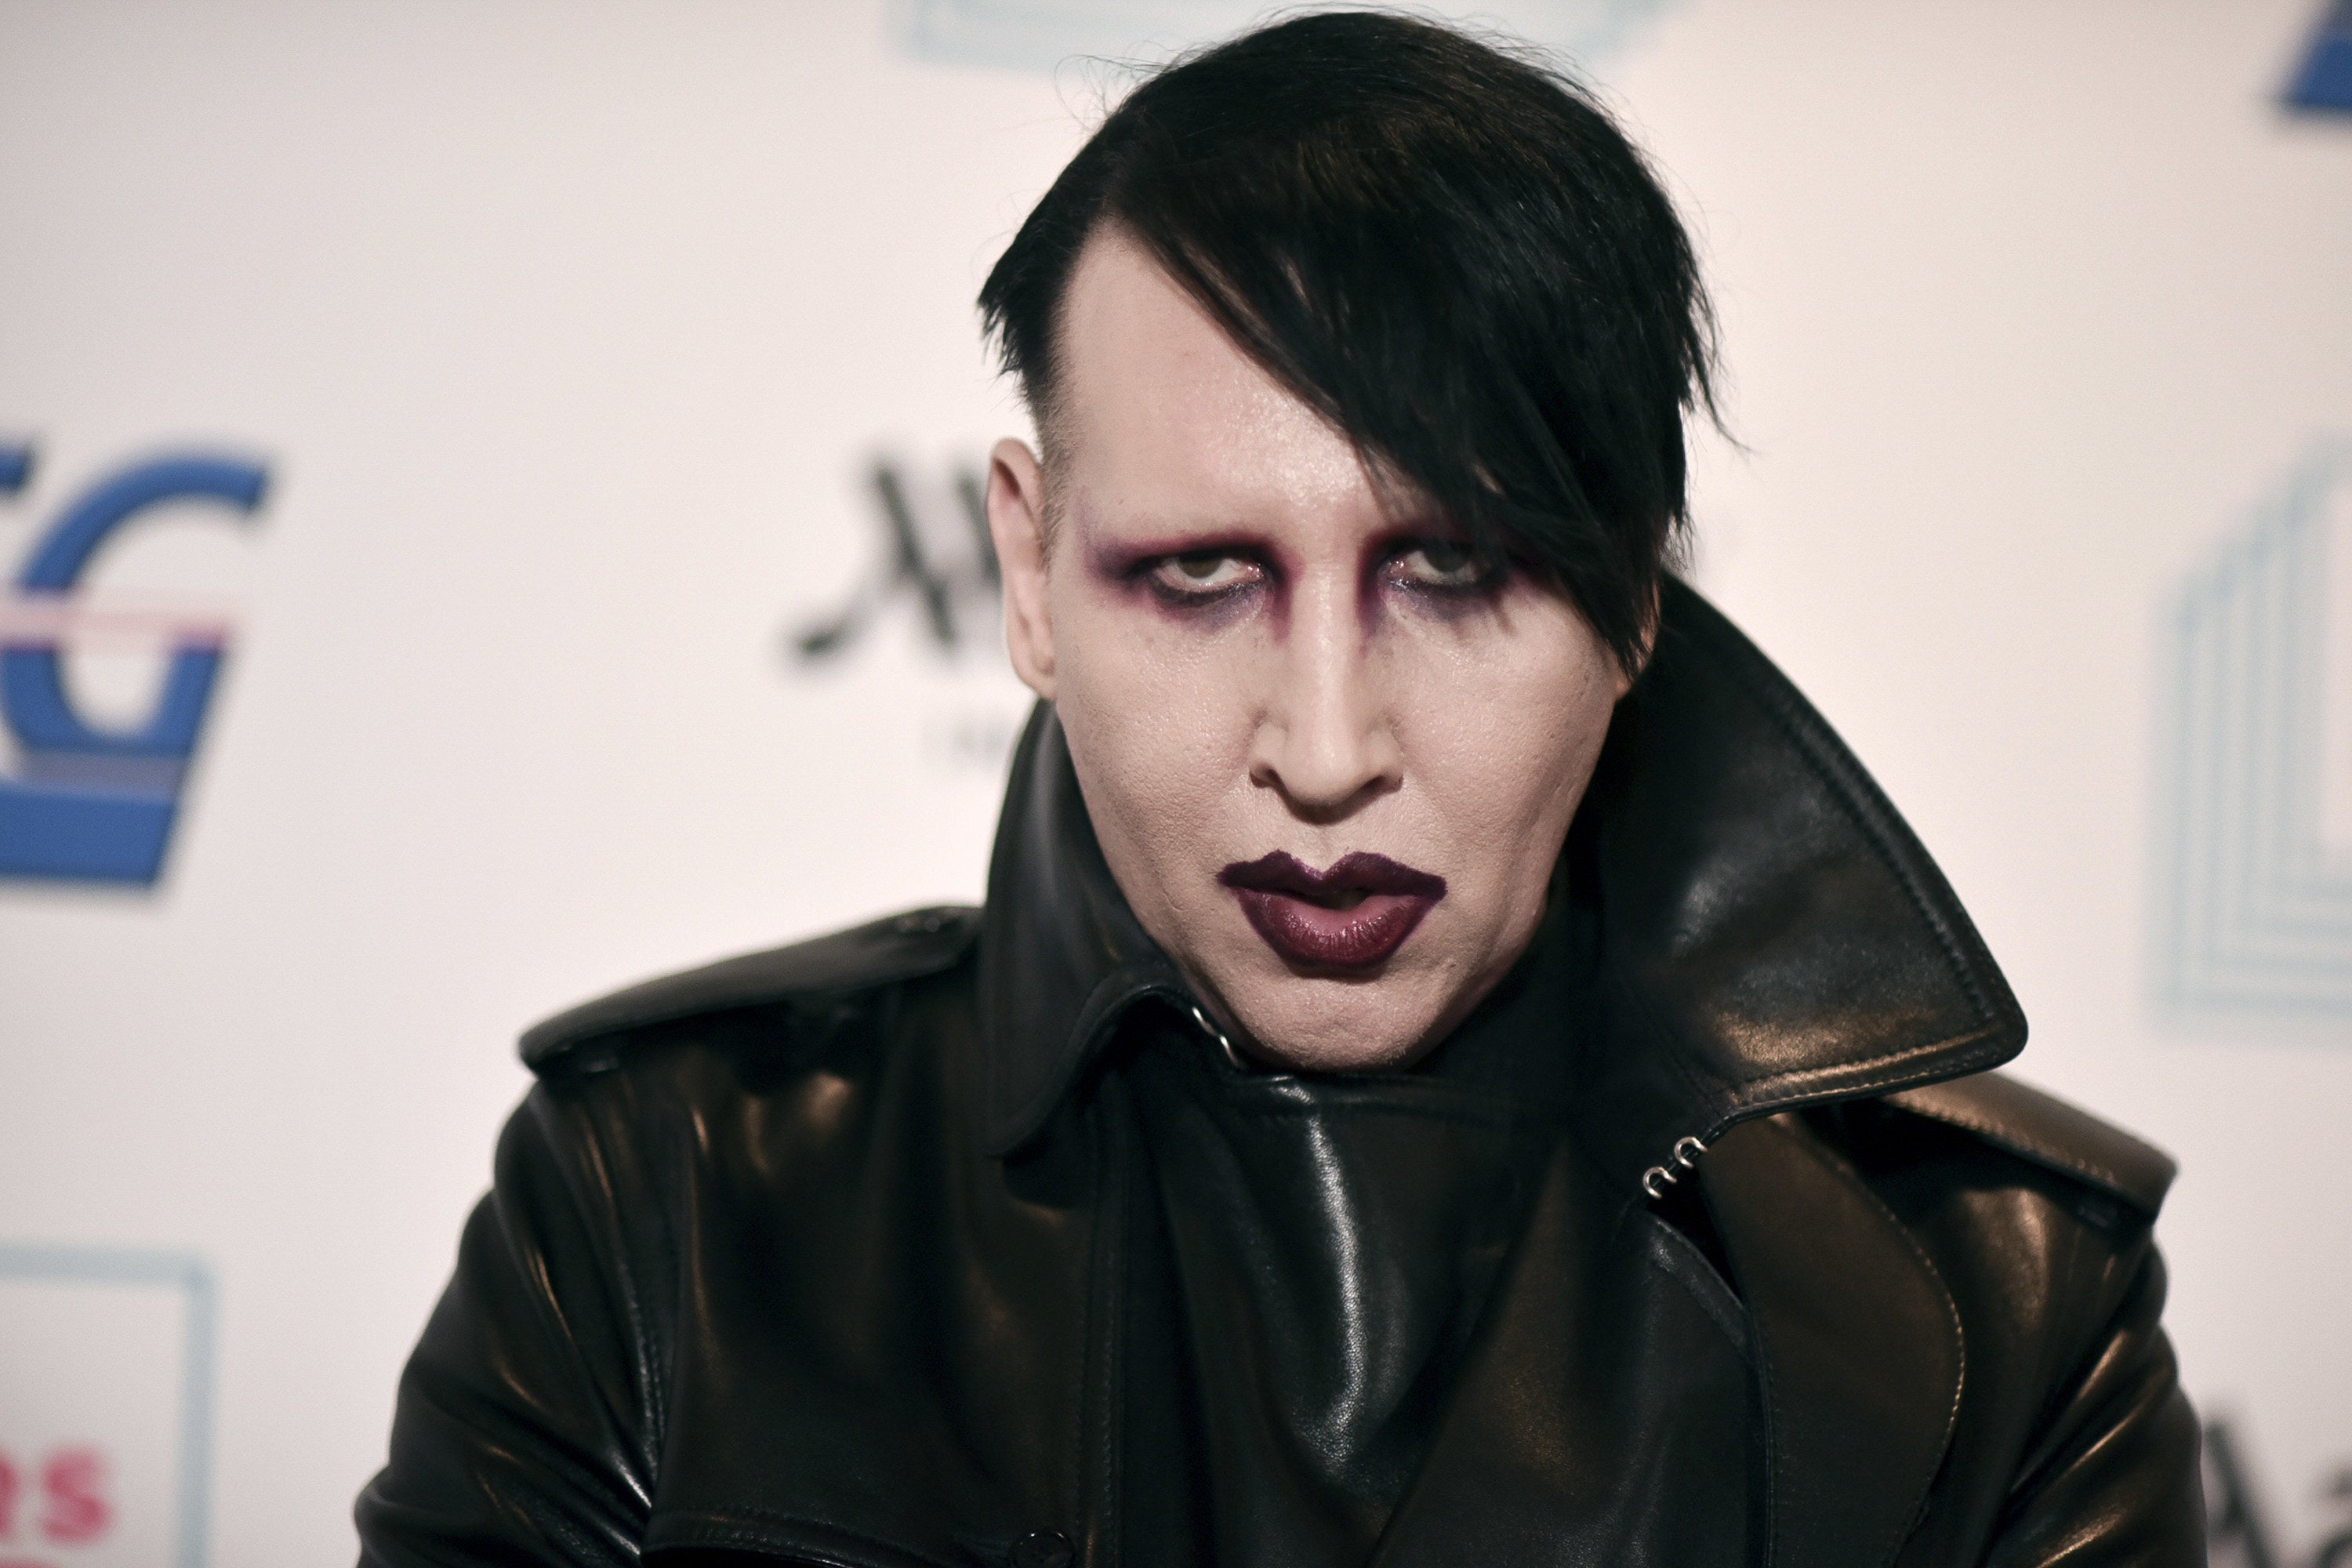 An Investigation Into Marilyn Manson Has Been Completed After Accusations Of Sexual Abuse, And Criminal Charges Could Follow